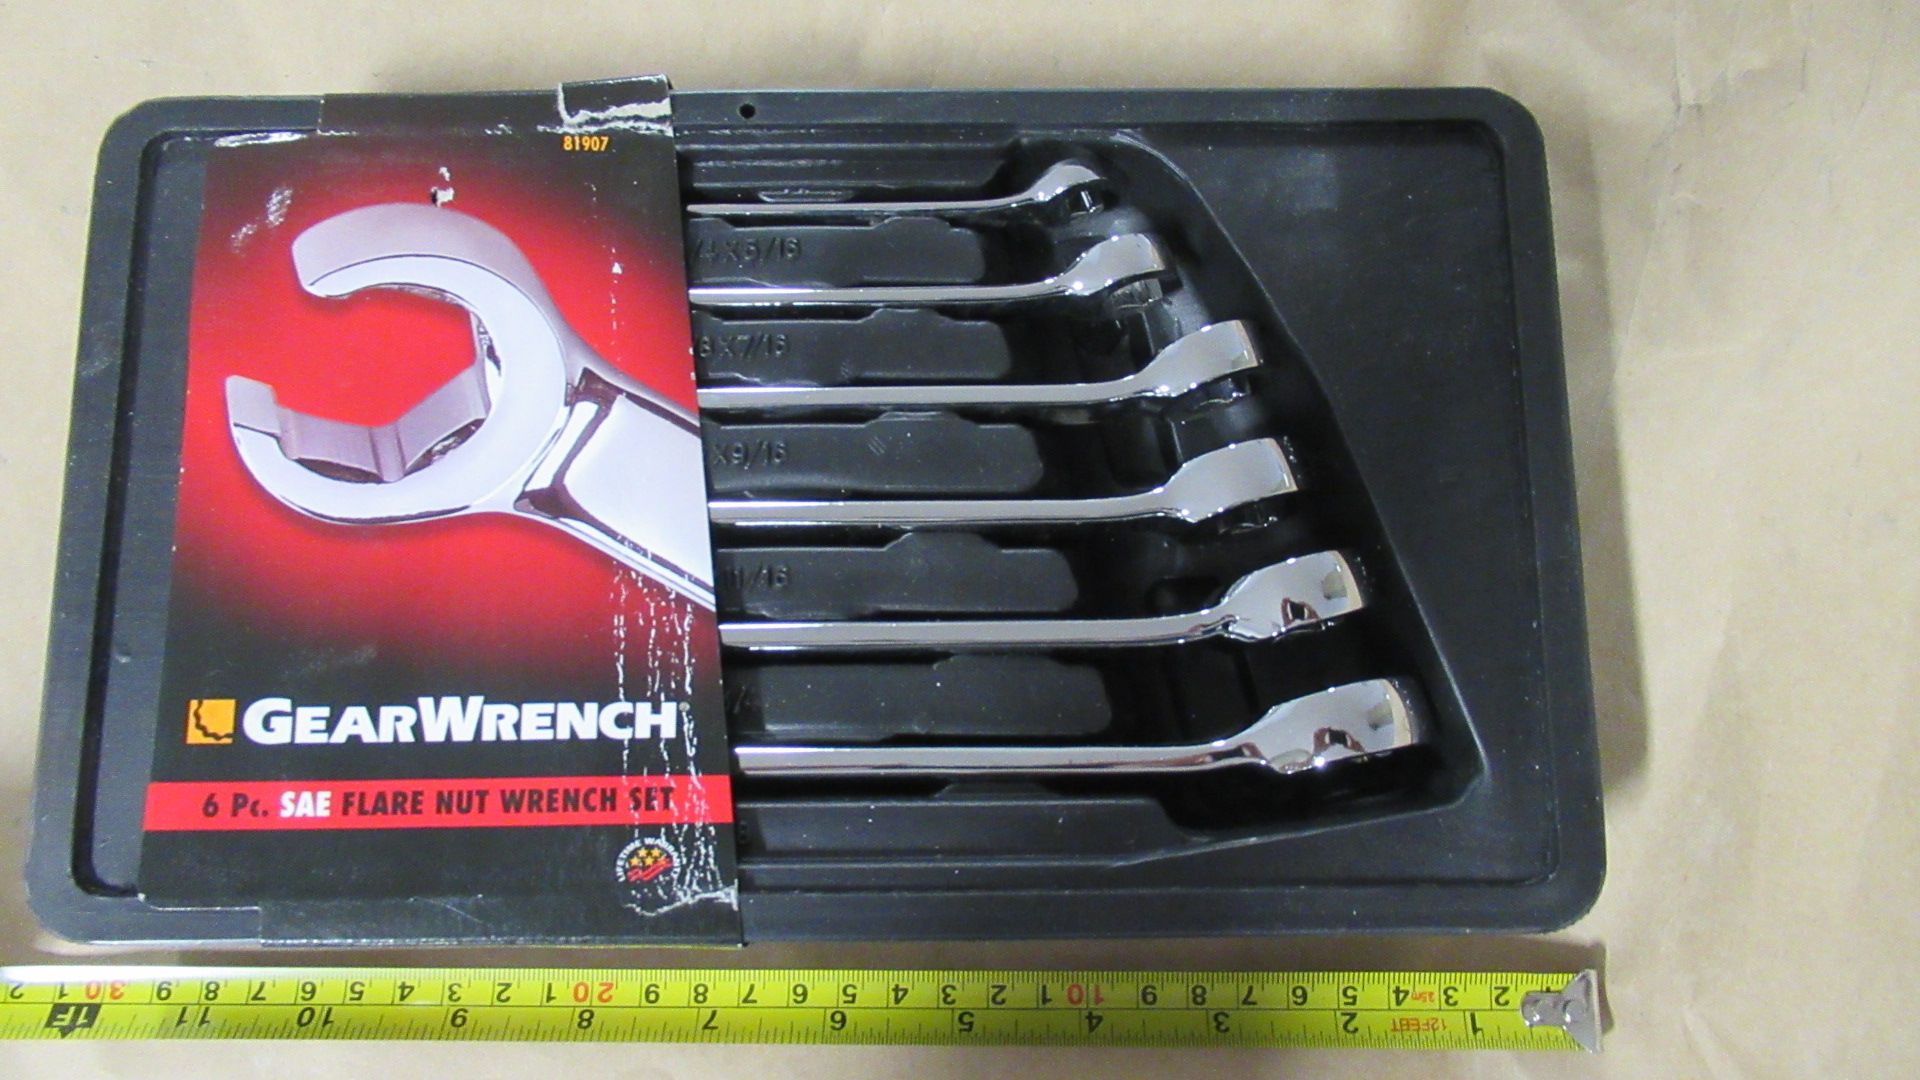 6 PC SAE FLARE NUT WRENCH SET GW 81907